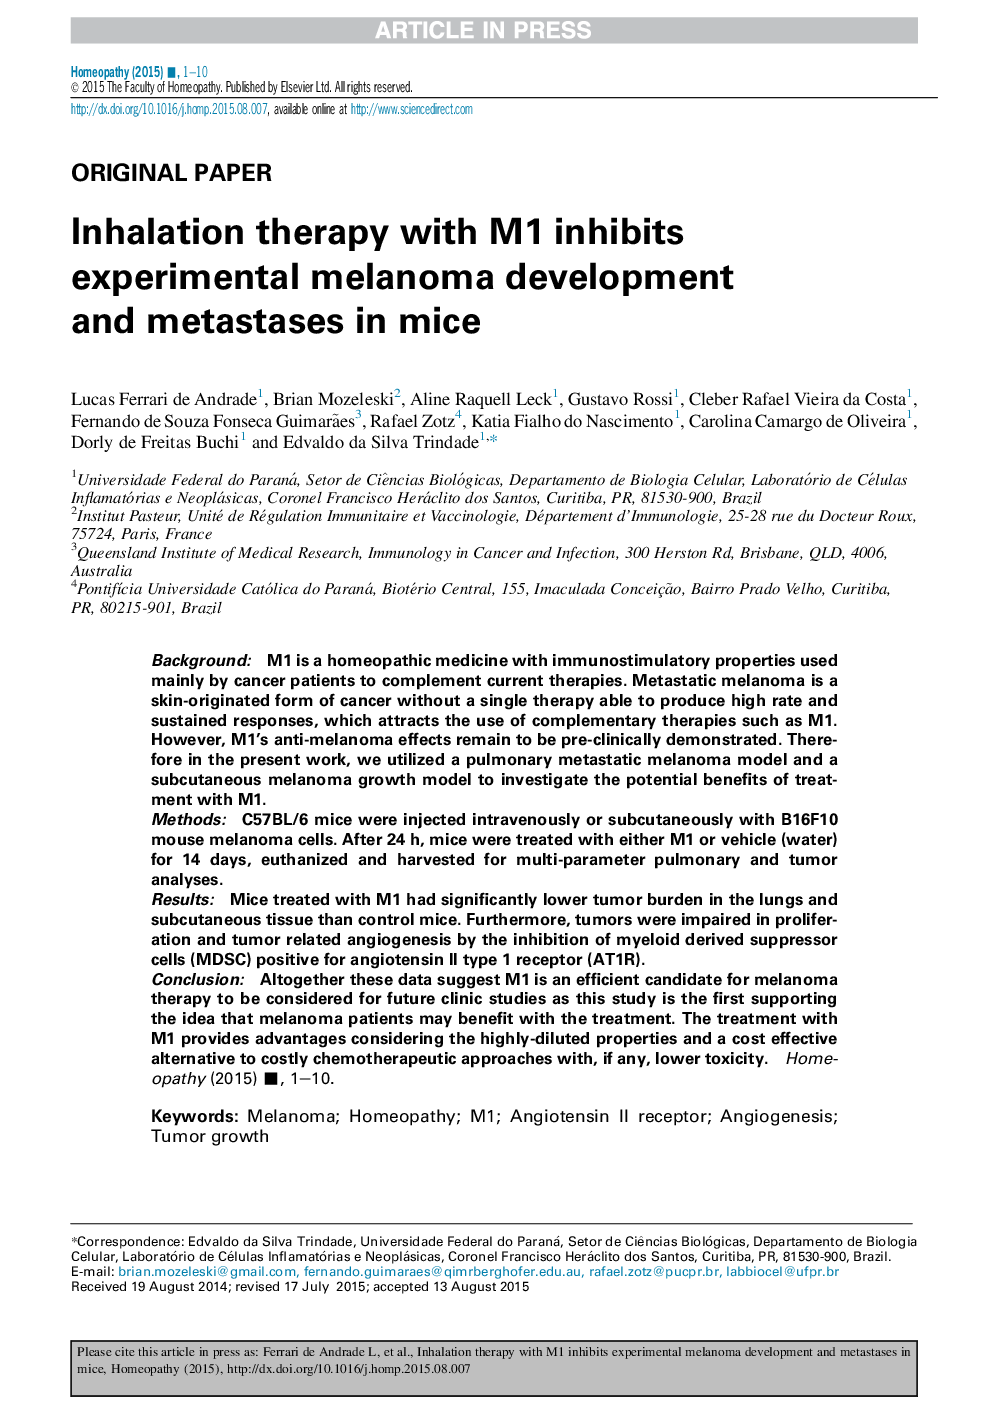 Inhalation therapy with M1 inhibits experimental melanoma development and metastases in mice